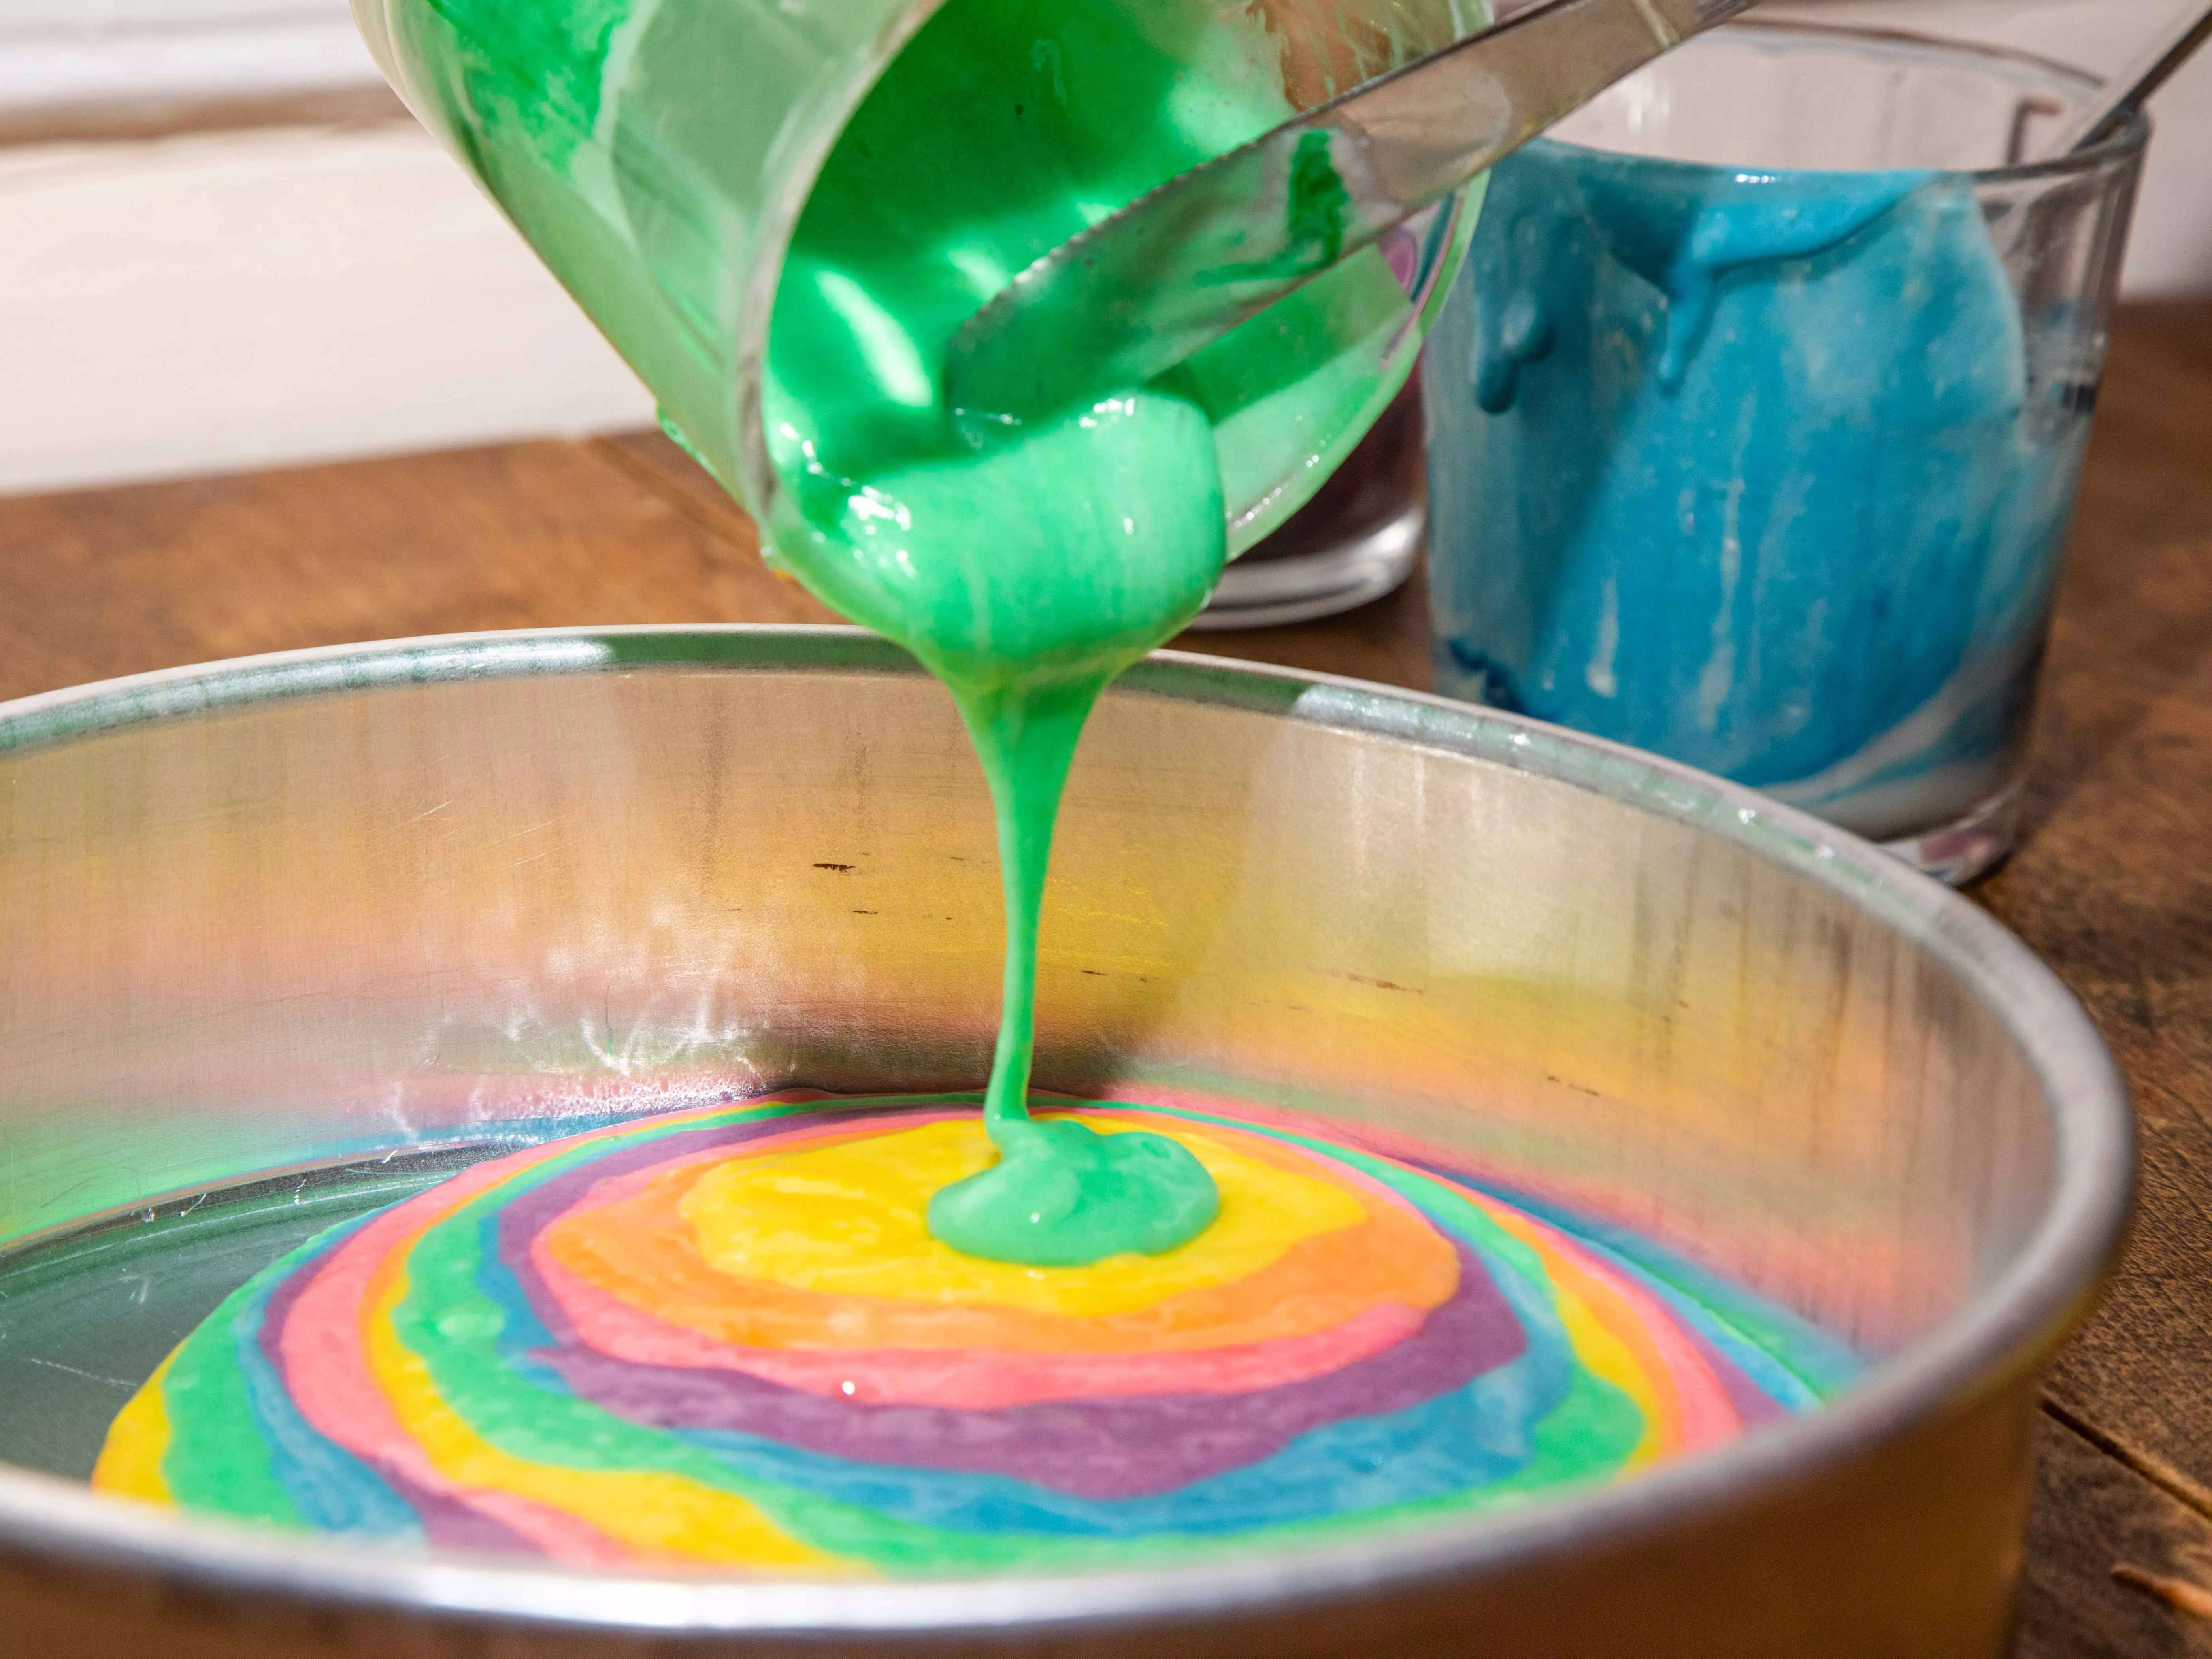 cake batter being poured into a pan to make tie dye rainbow cake